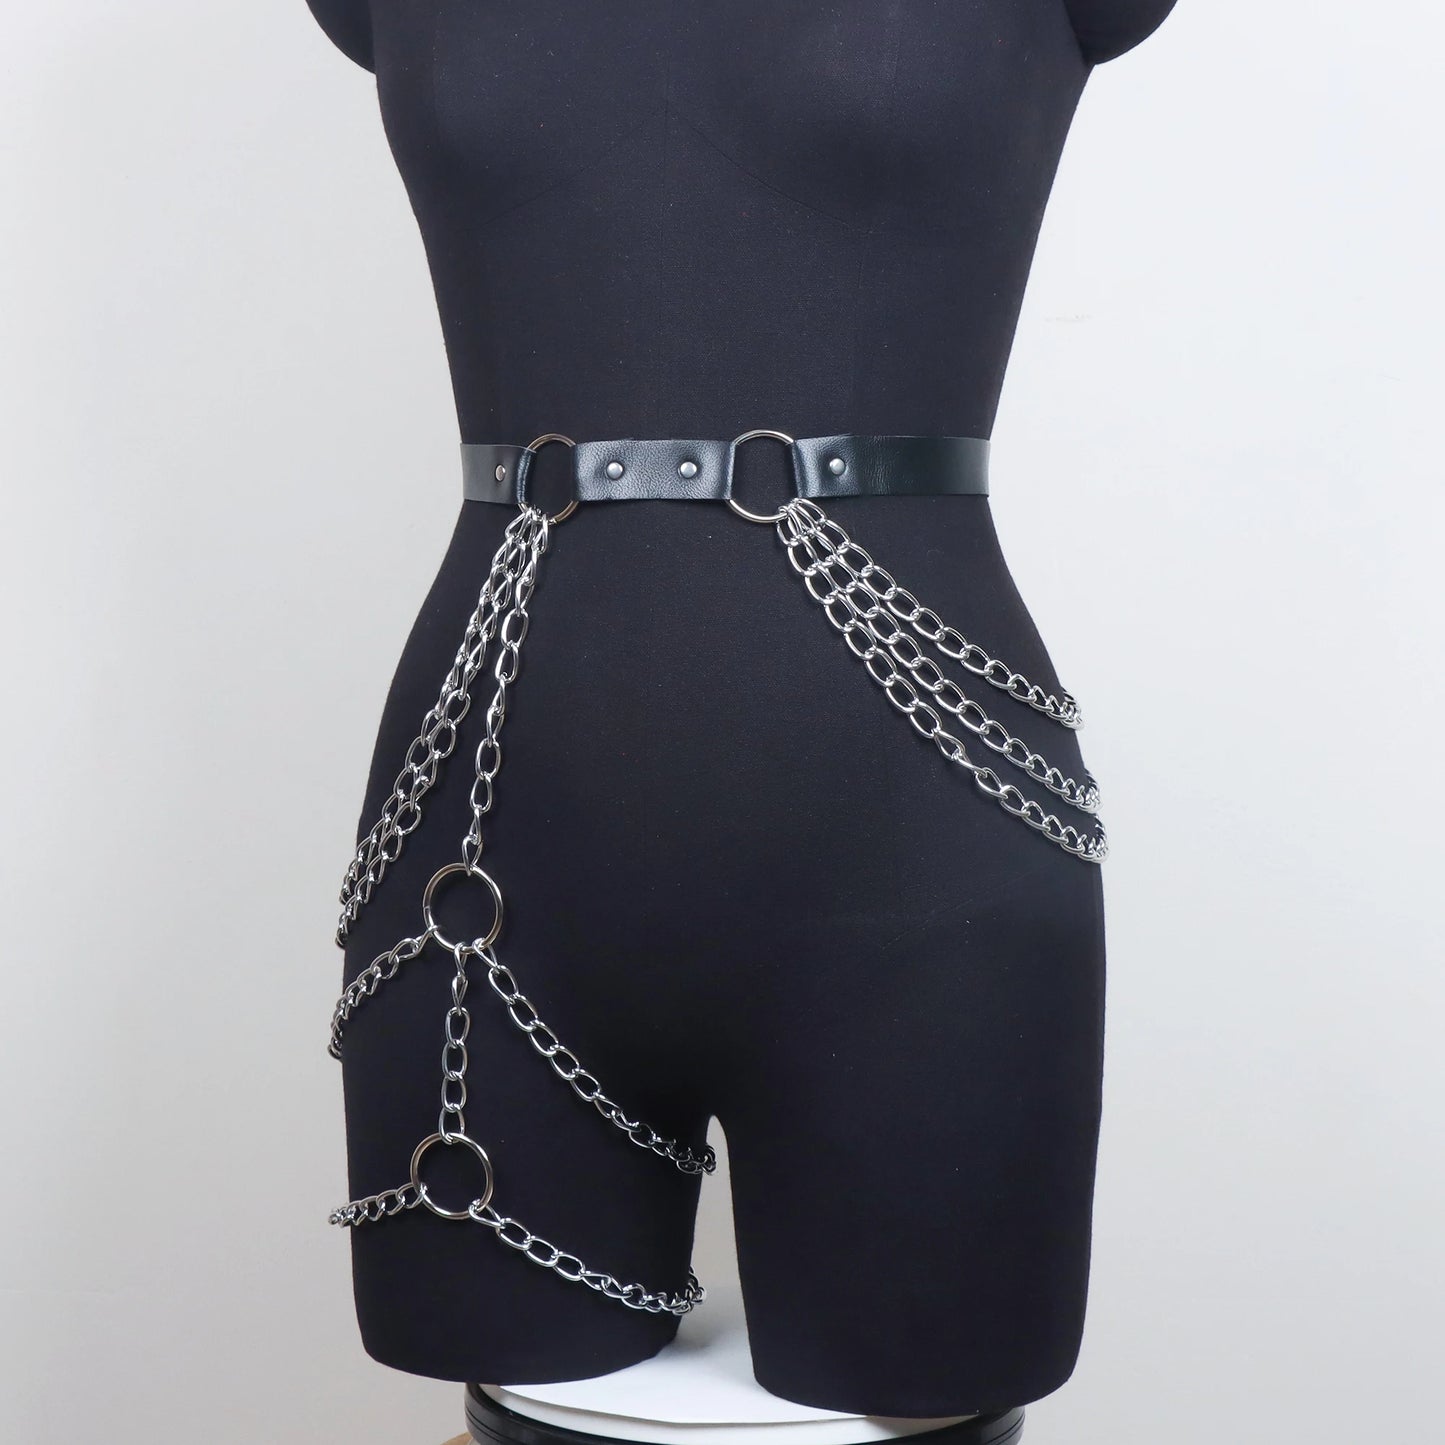 Phantom Veil Thigh Harness | Veil in Mystery, Adorn in Darkness - A Gothic Universe - Belts